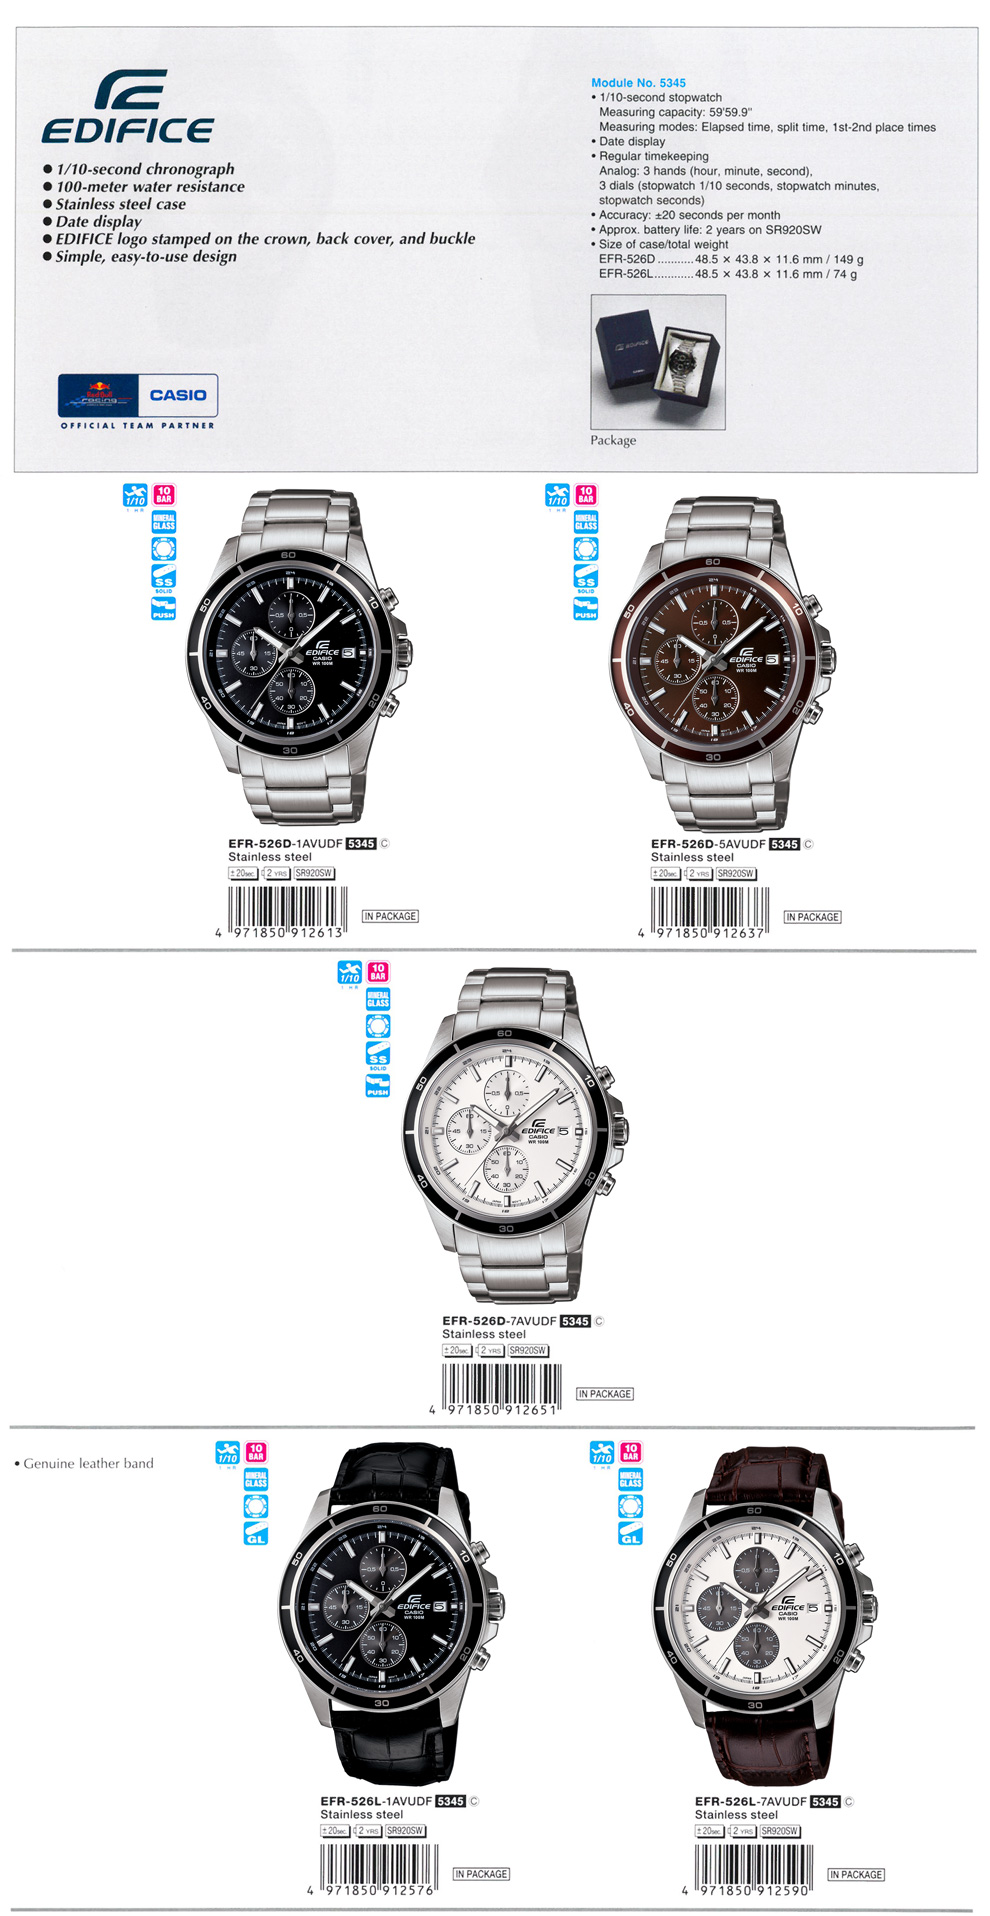 Watch, Edifice, Chronograph, 100-meter water resistance, date display, simple, easy-to-use design, EFR-526D-1AV, EFR-526D-5A, EFR-526D-7AV, EFR-526L-1AV, EFR-526L-7AV